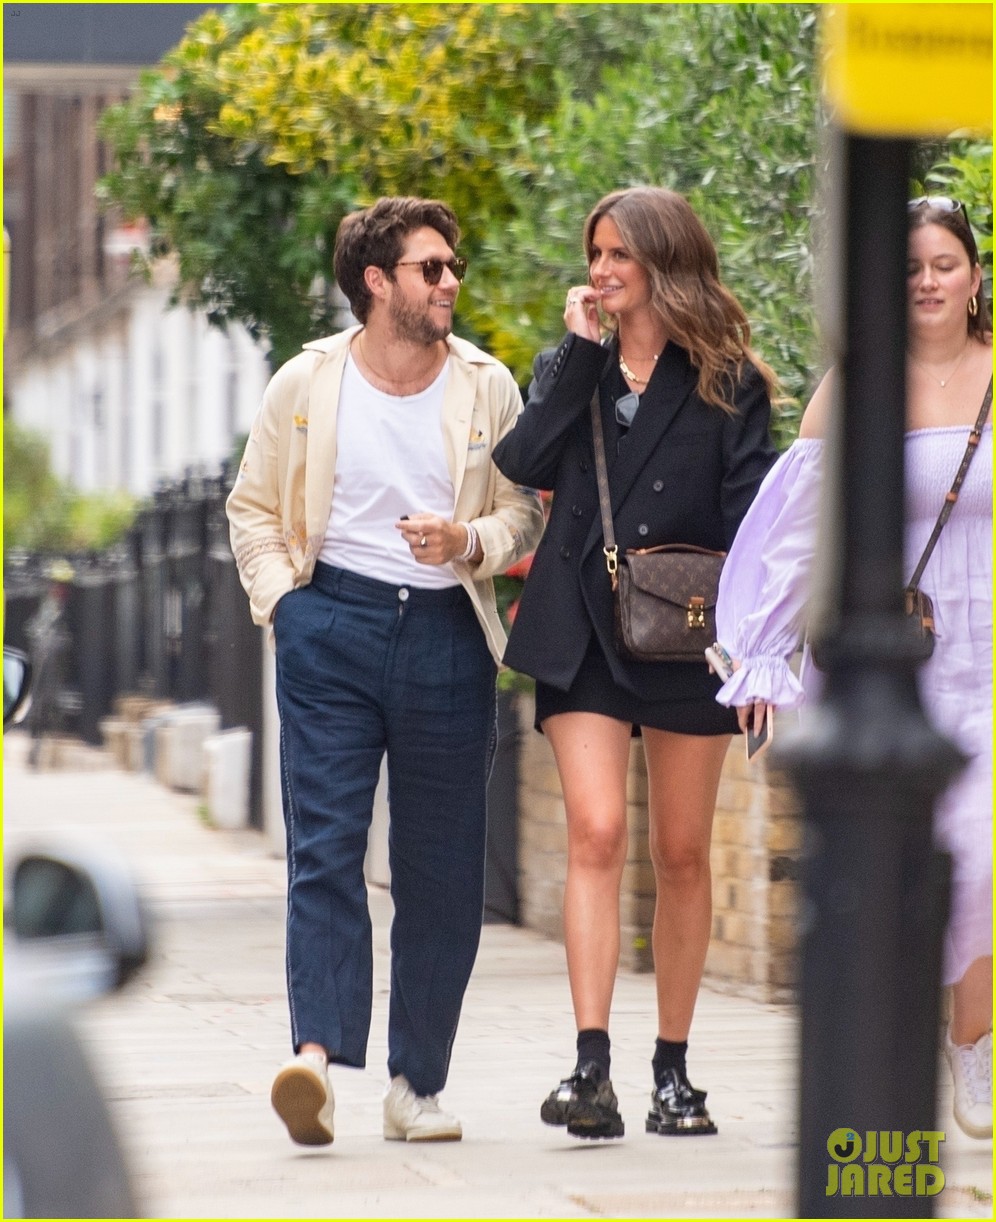 Niall Horan Keeps Close with Girlfriend Amelia Woolley During a Day Out ...